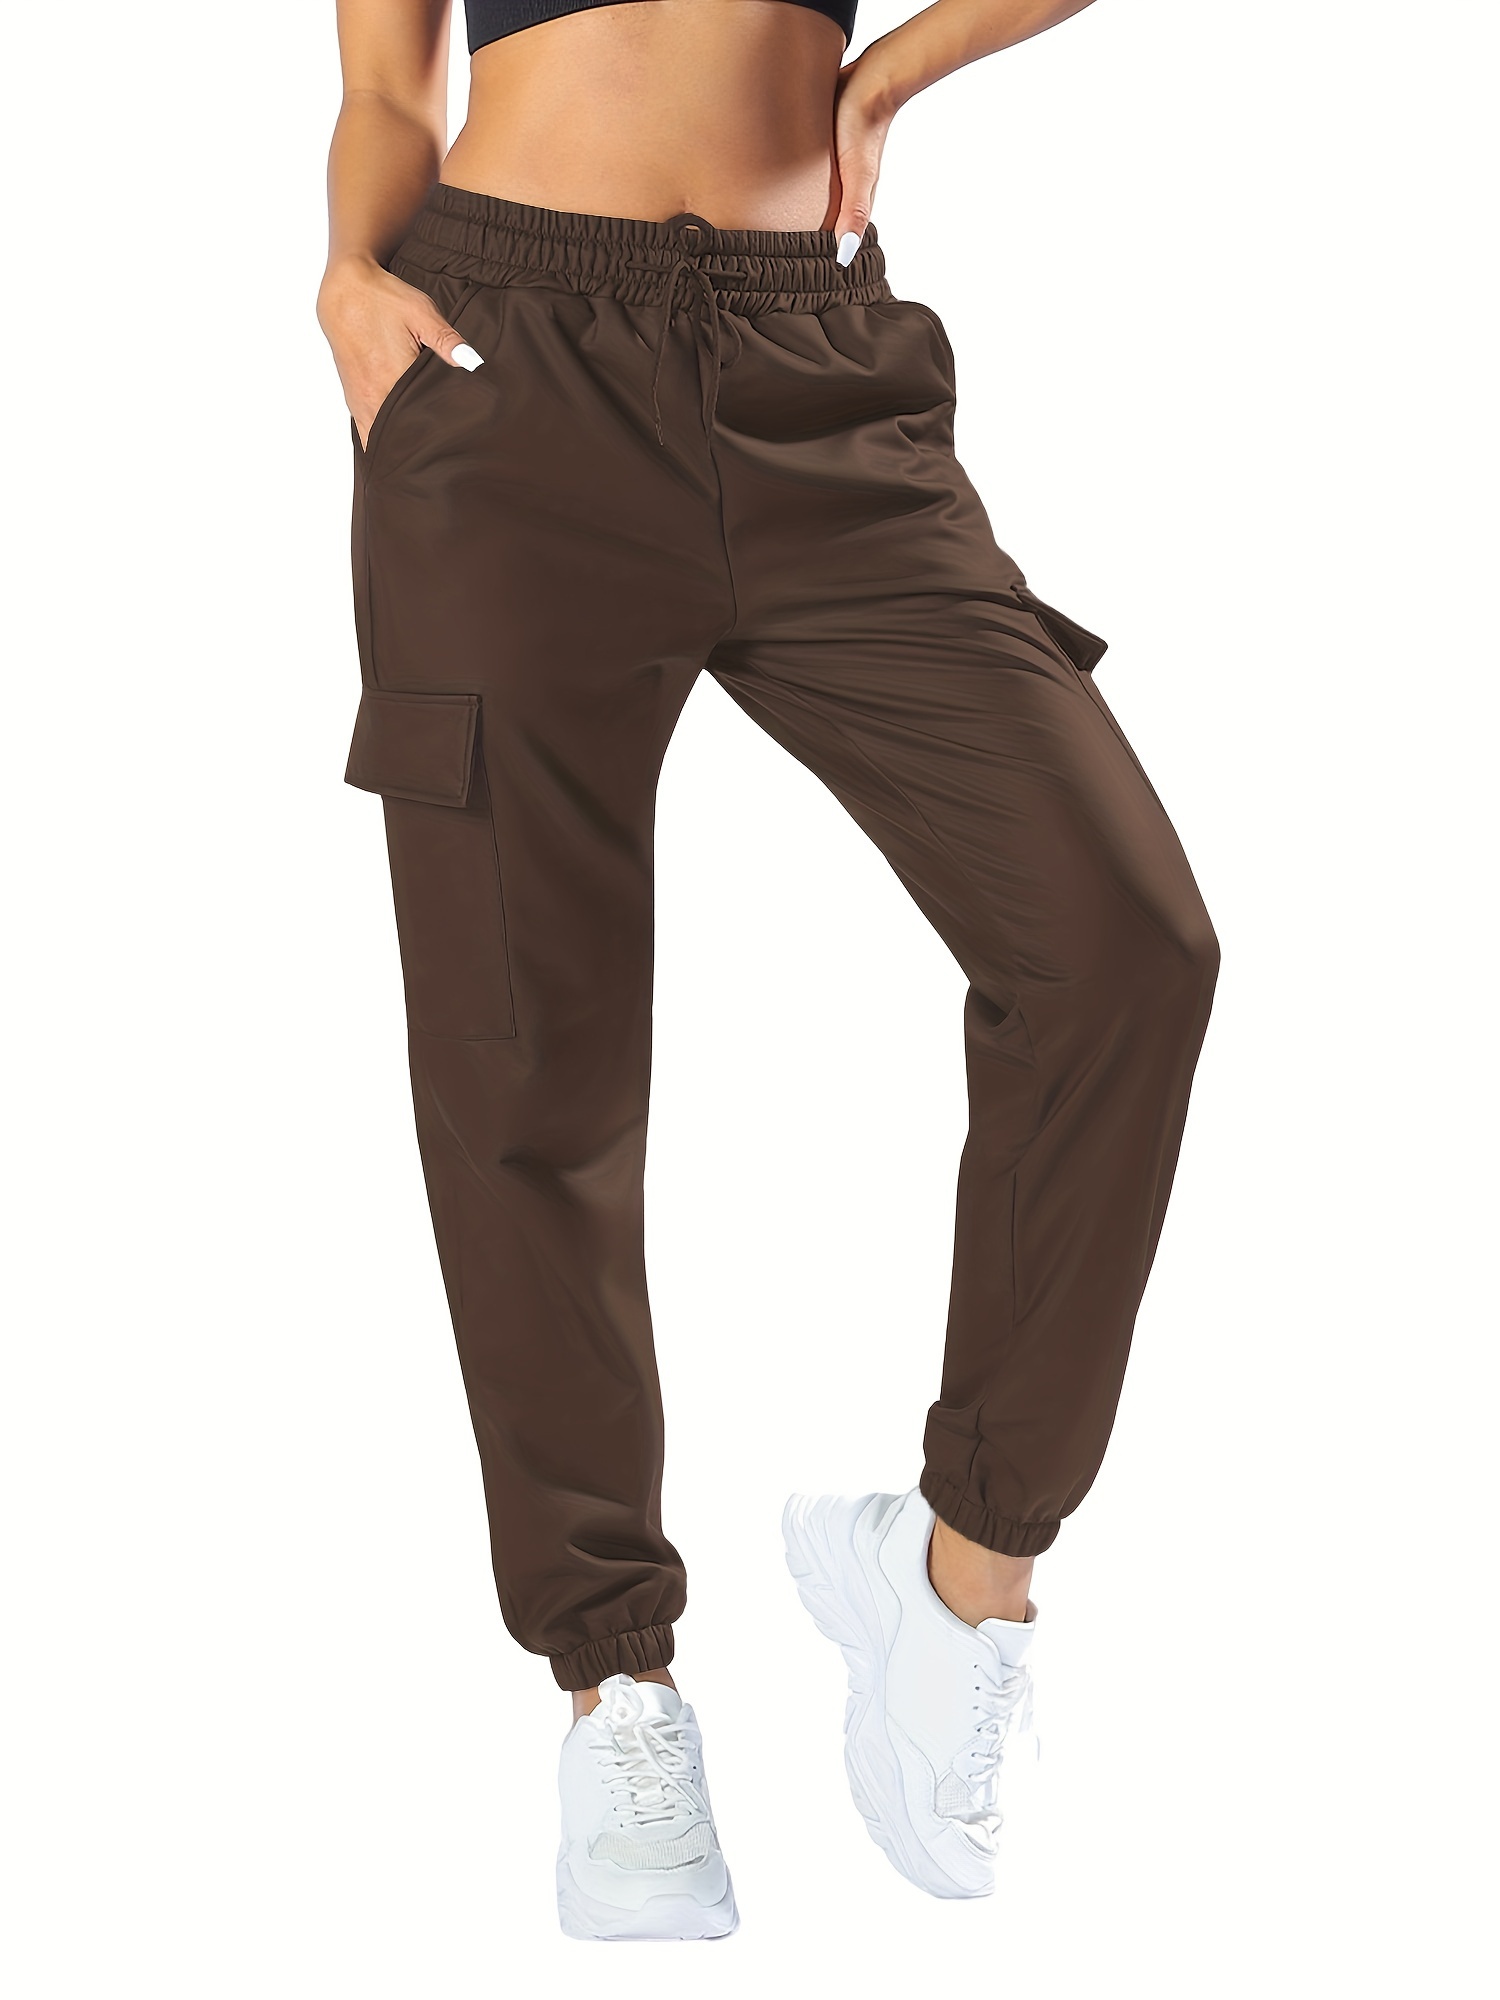 Brown faux-leather cargo pant